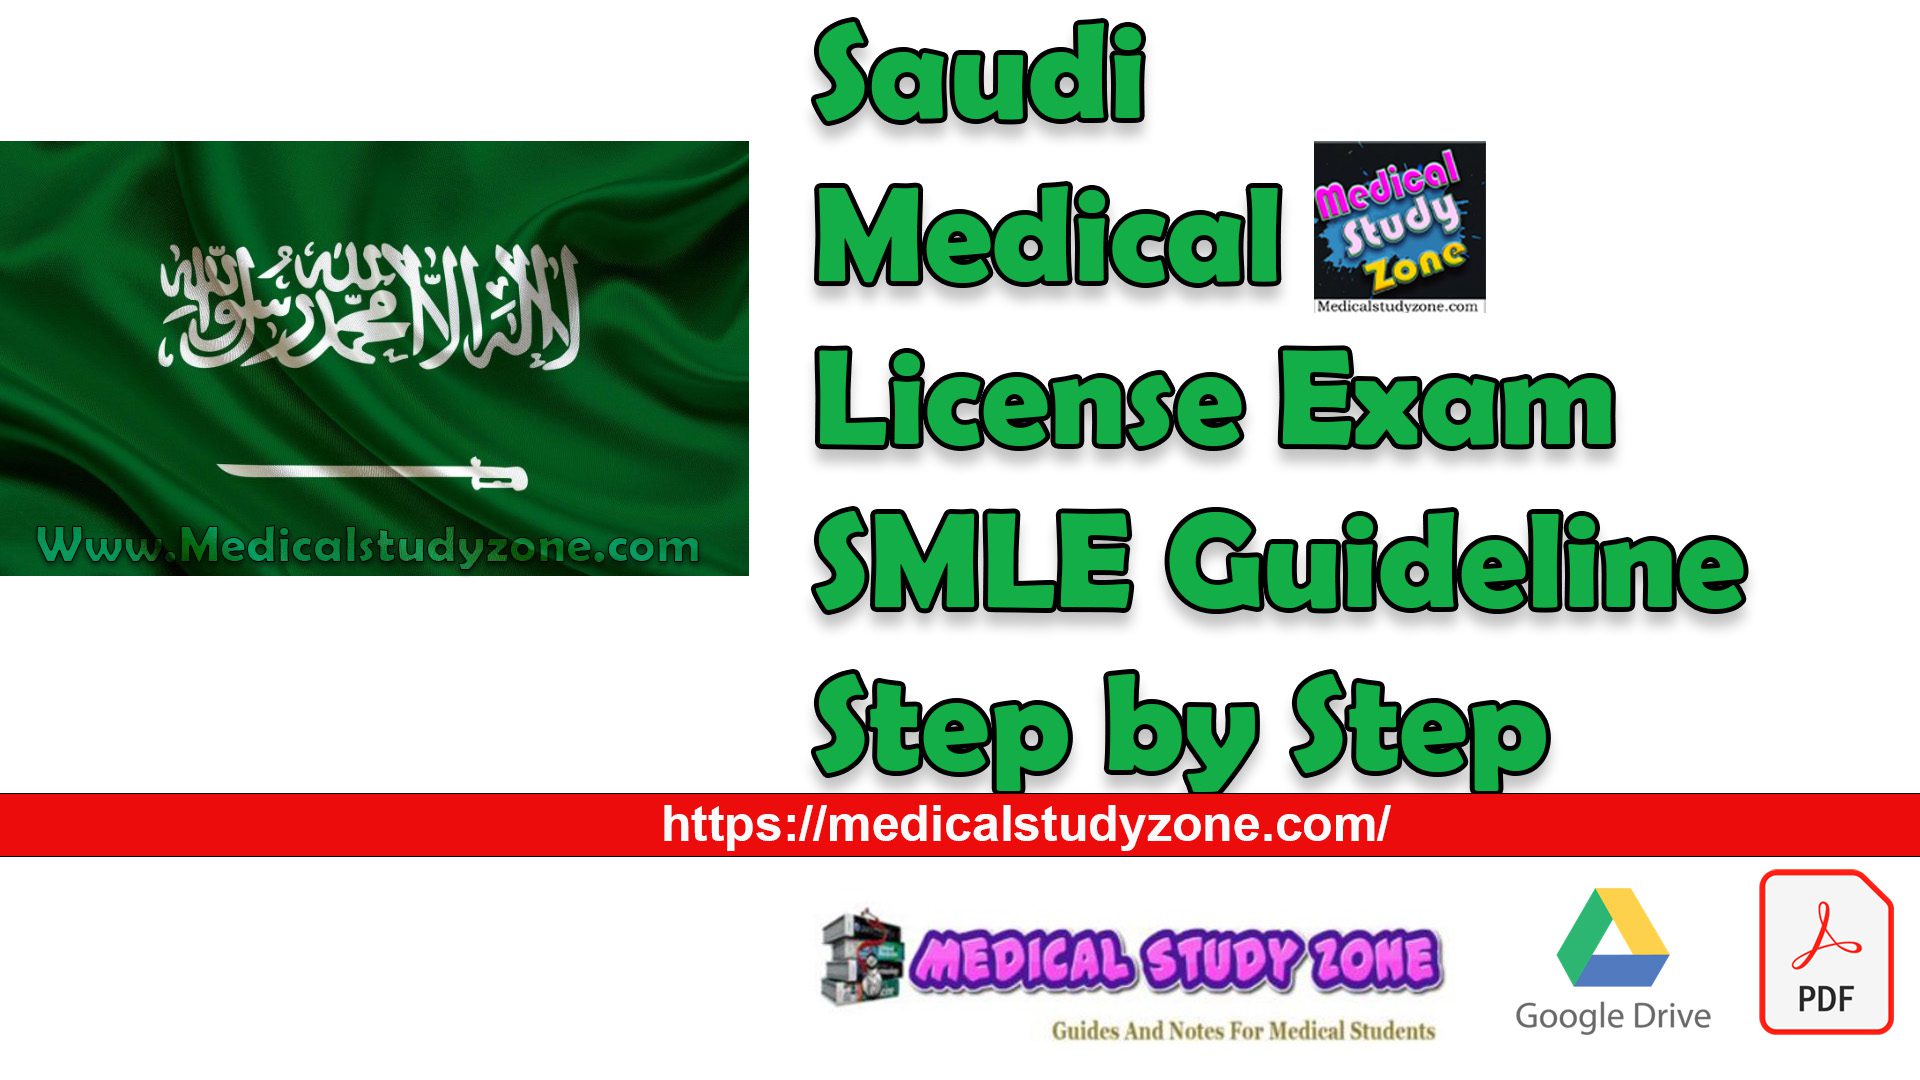 Saudi Medical License Exam SMLE Guidelines 2023 Step by Step